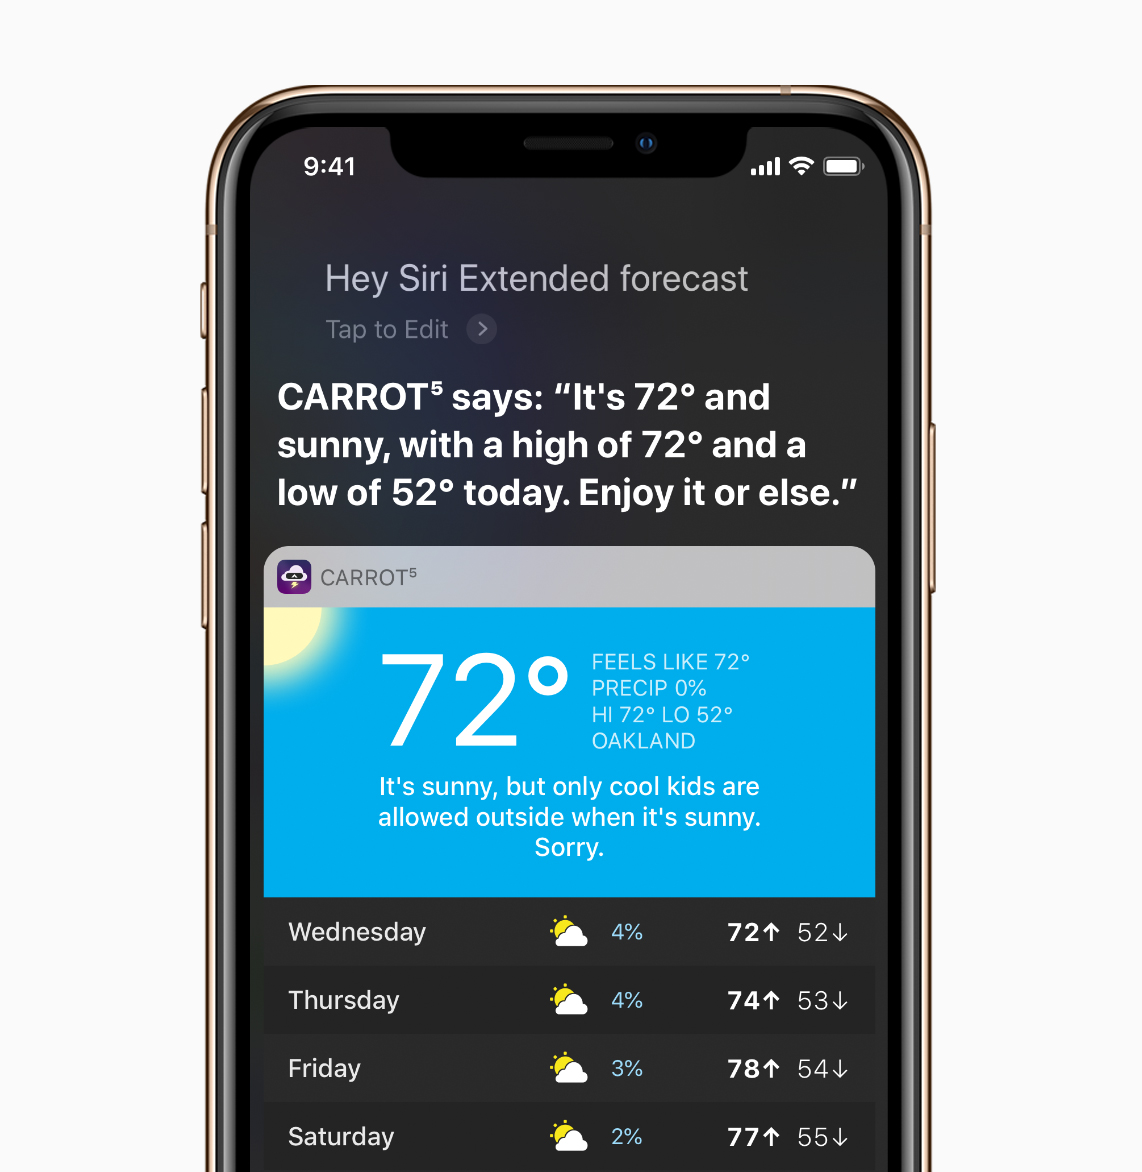 Apple Highlights Apps With Siri Shortcuts Support